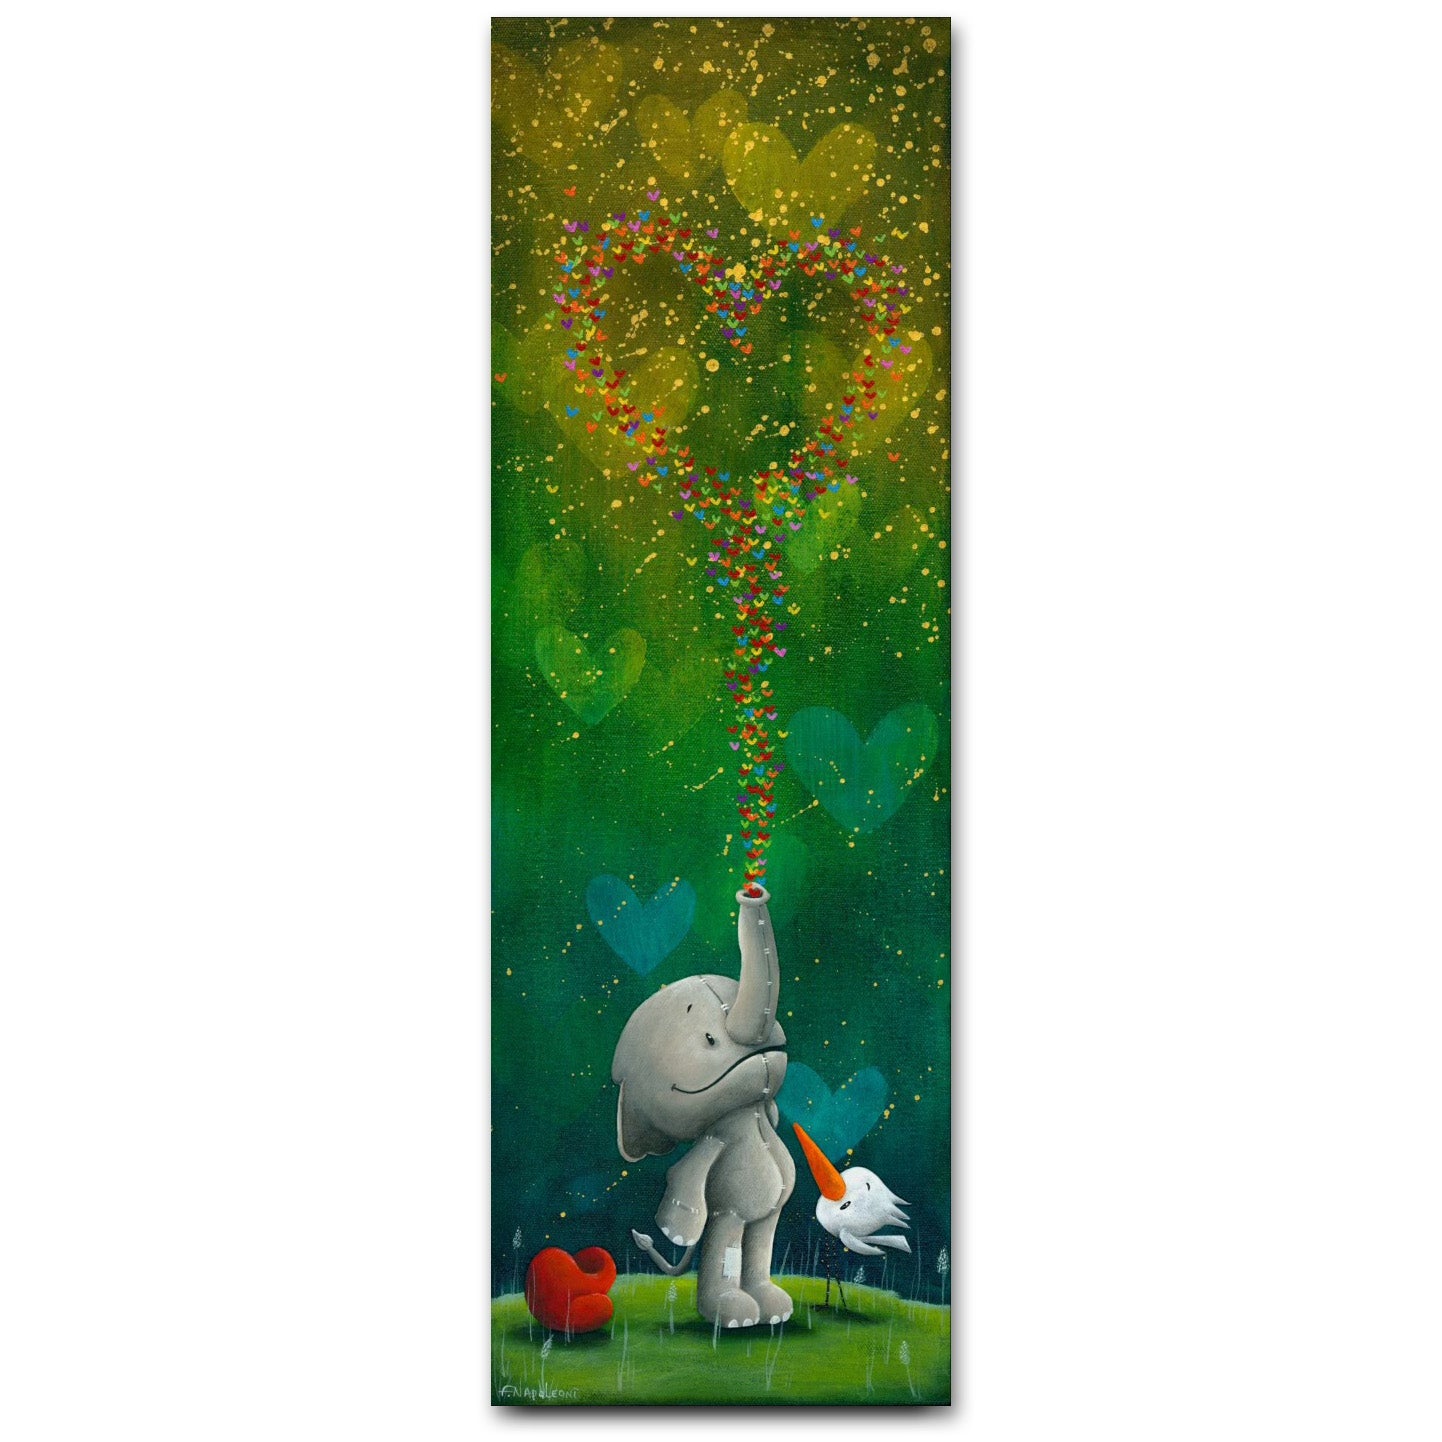 Fabio Napoleoni "This Feeling is Good" Limited Edition Canvas Giclee